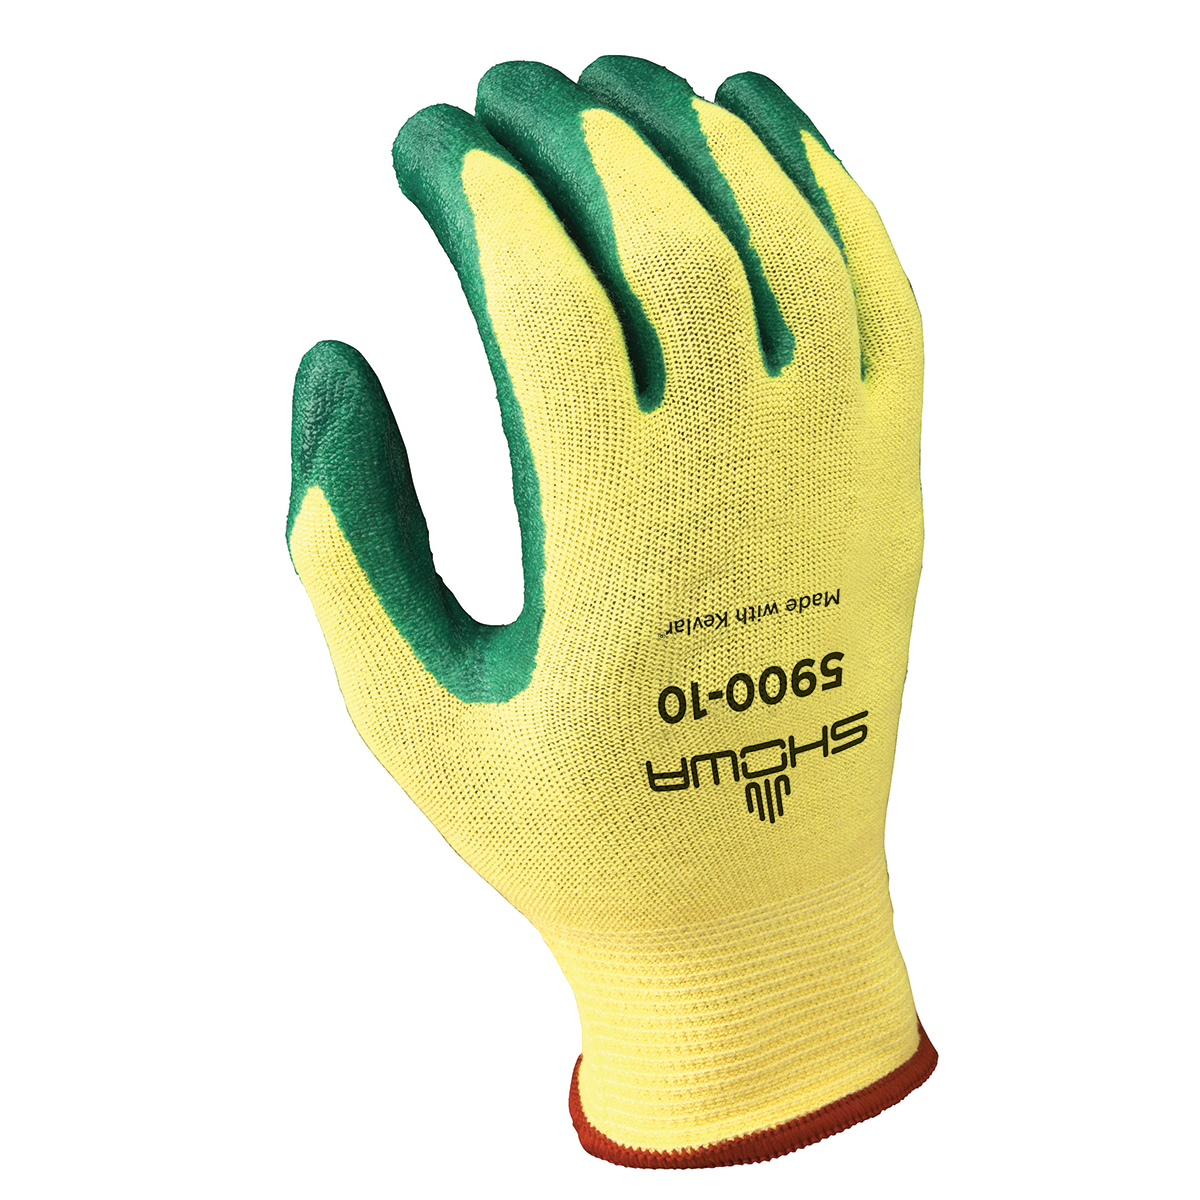 Cut resistant, nitrile-coated flat-dipped, yellow/green dip, seamless, cut-resistant, Kevlar®-Lycra® shell, extra large ANSI CUT LEVEL A3